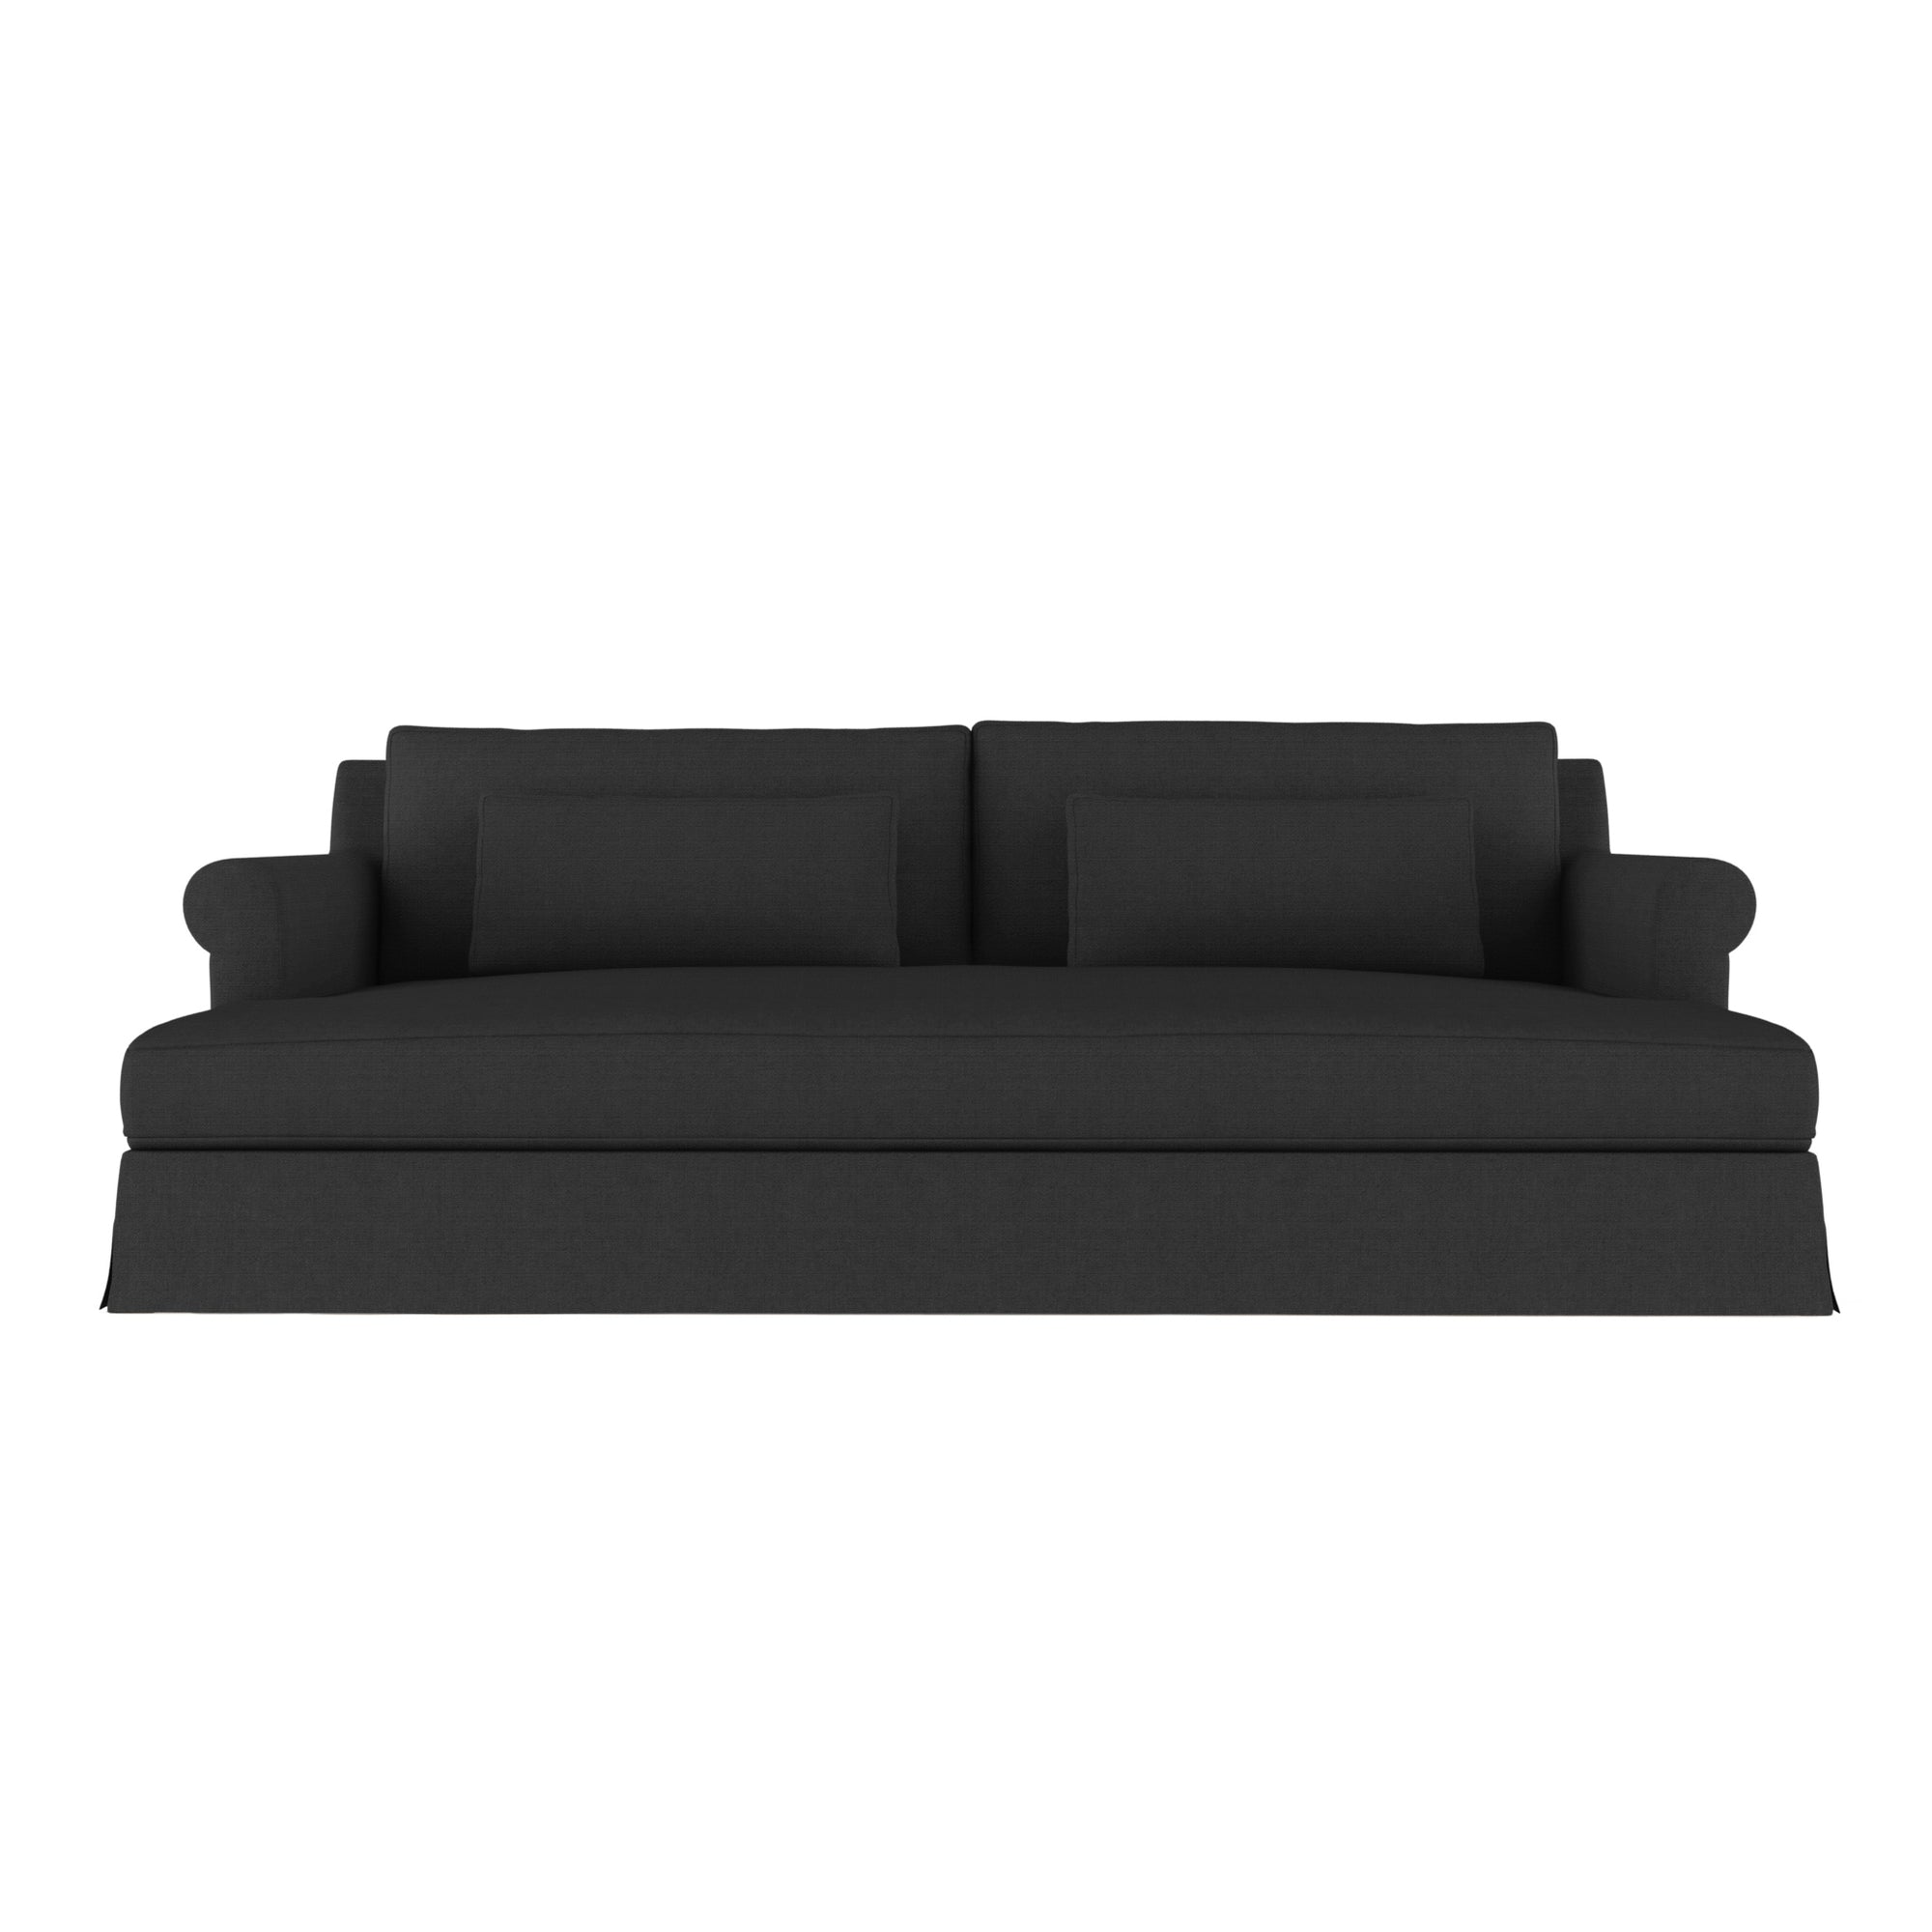 Ludlow Daybed - Black Jack Box Weave Linen